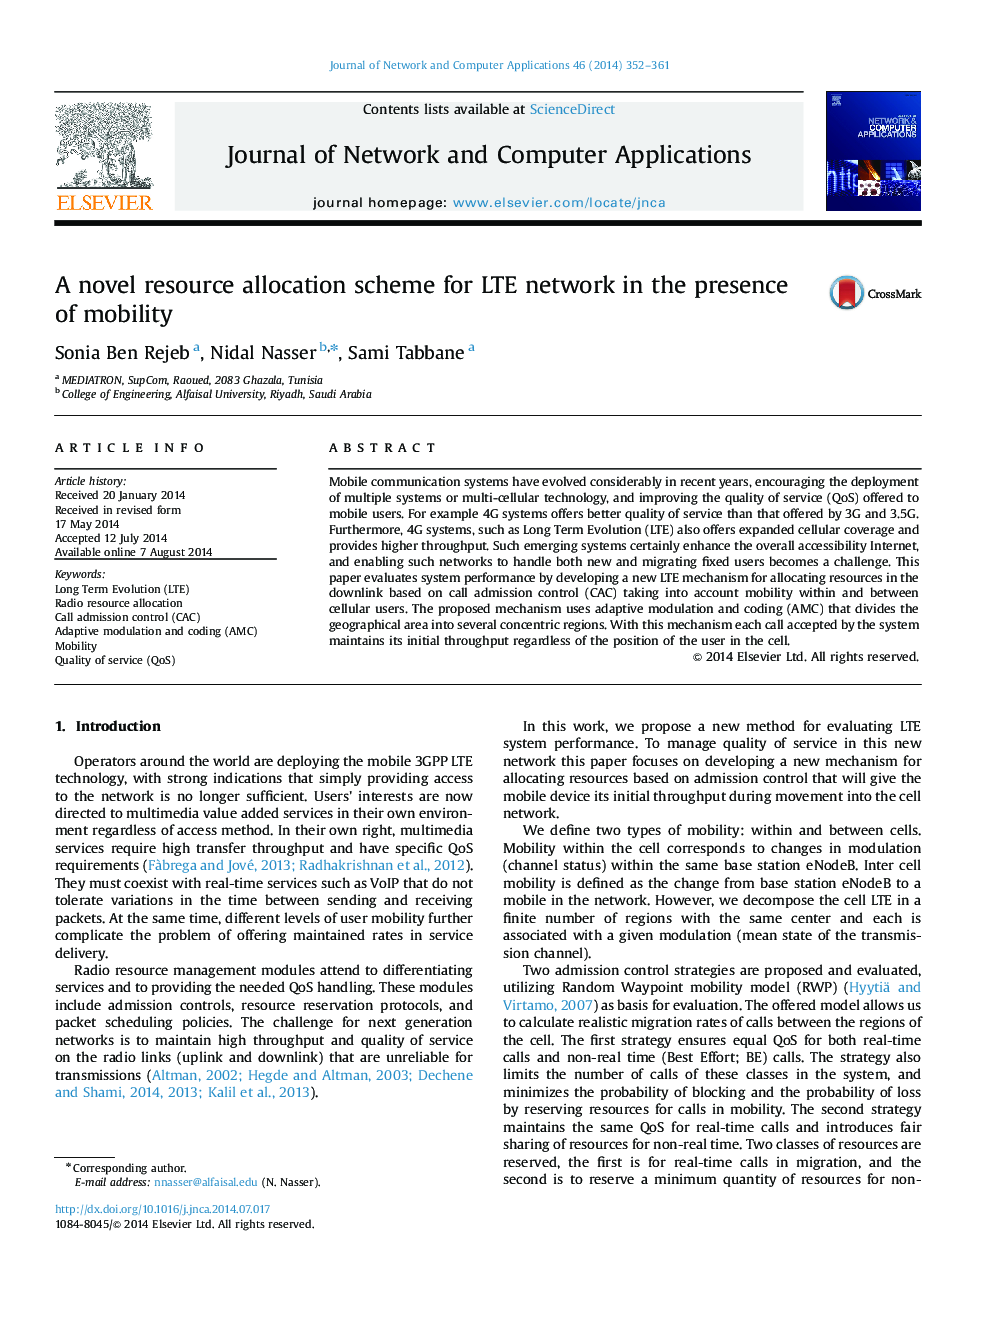 A novel resource allocation scheme for LTE network in the presence of mobility